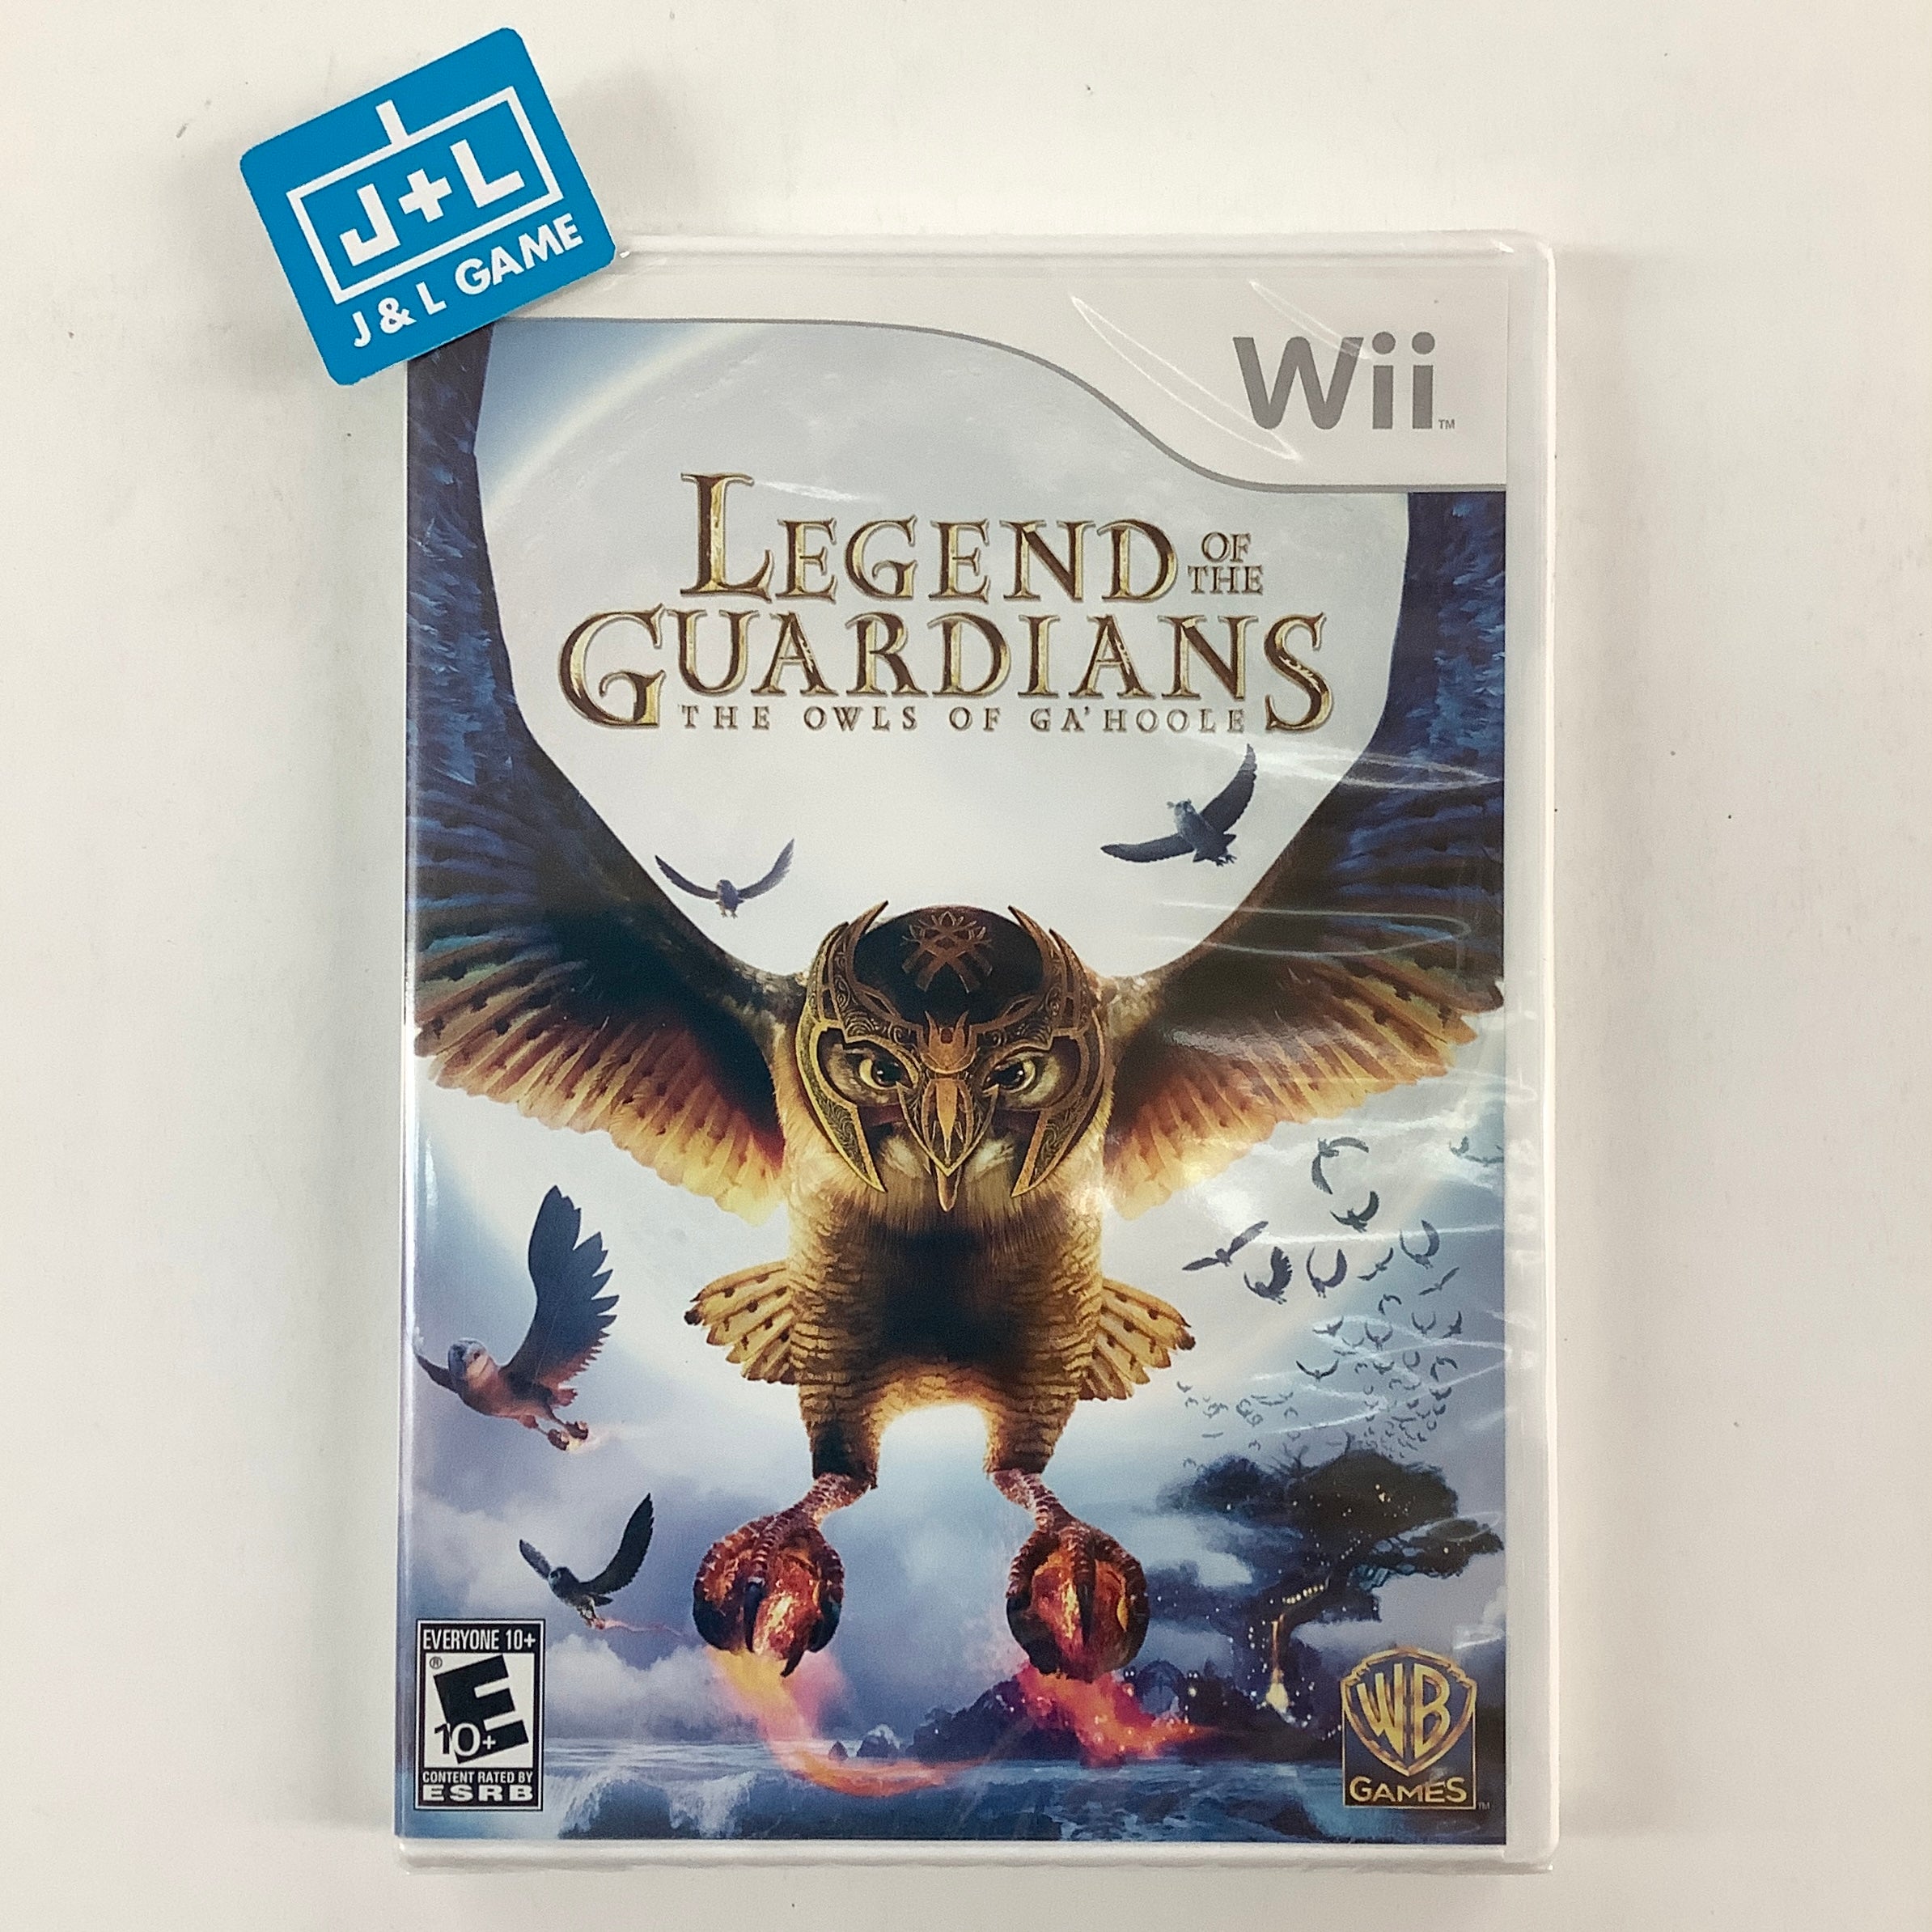 Legend of the Guardians: The Owls of Ga'Hoole - Nintendo Wii Video Games Warner Bros. Interactive Entertainment   